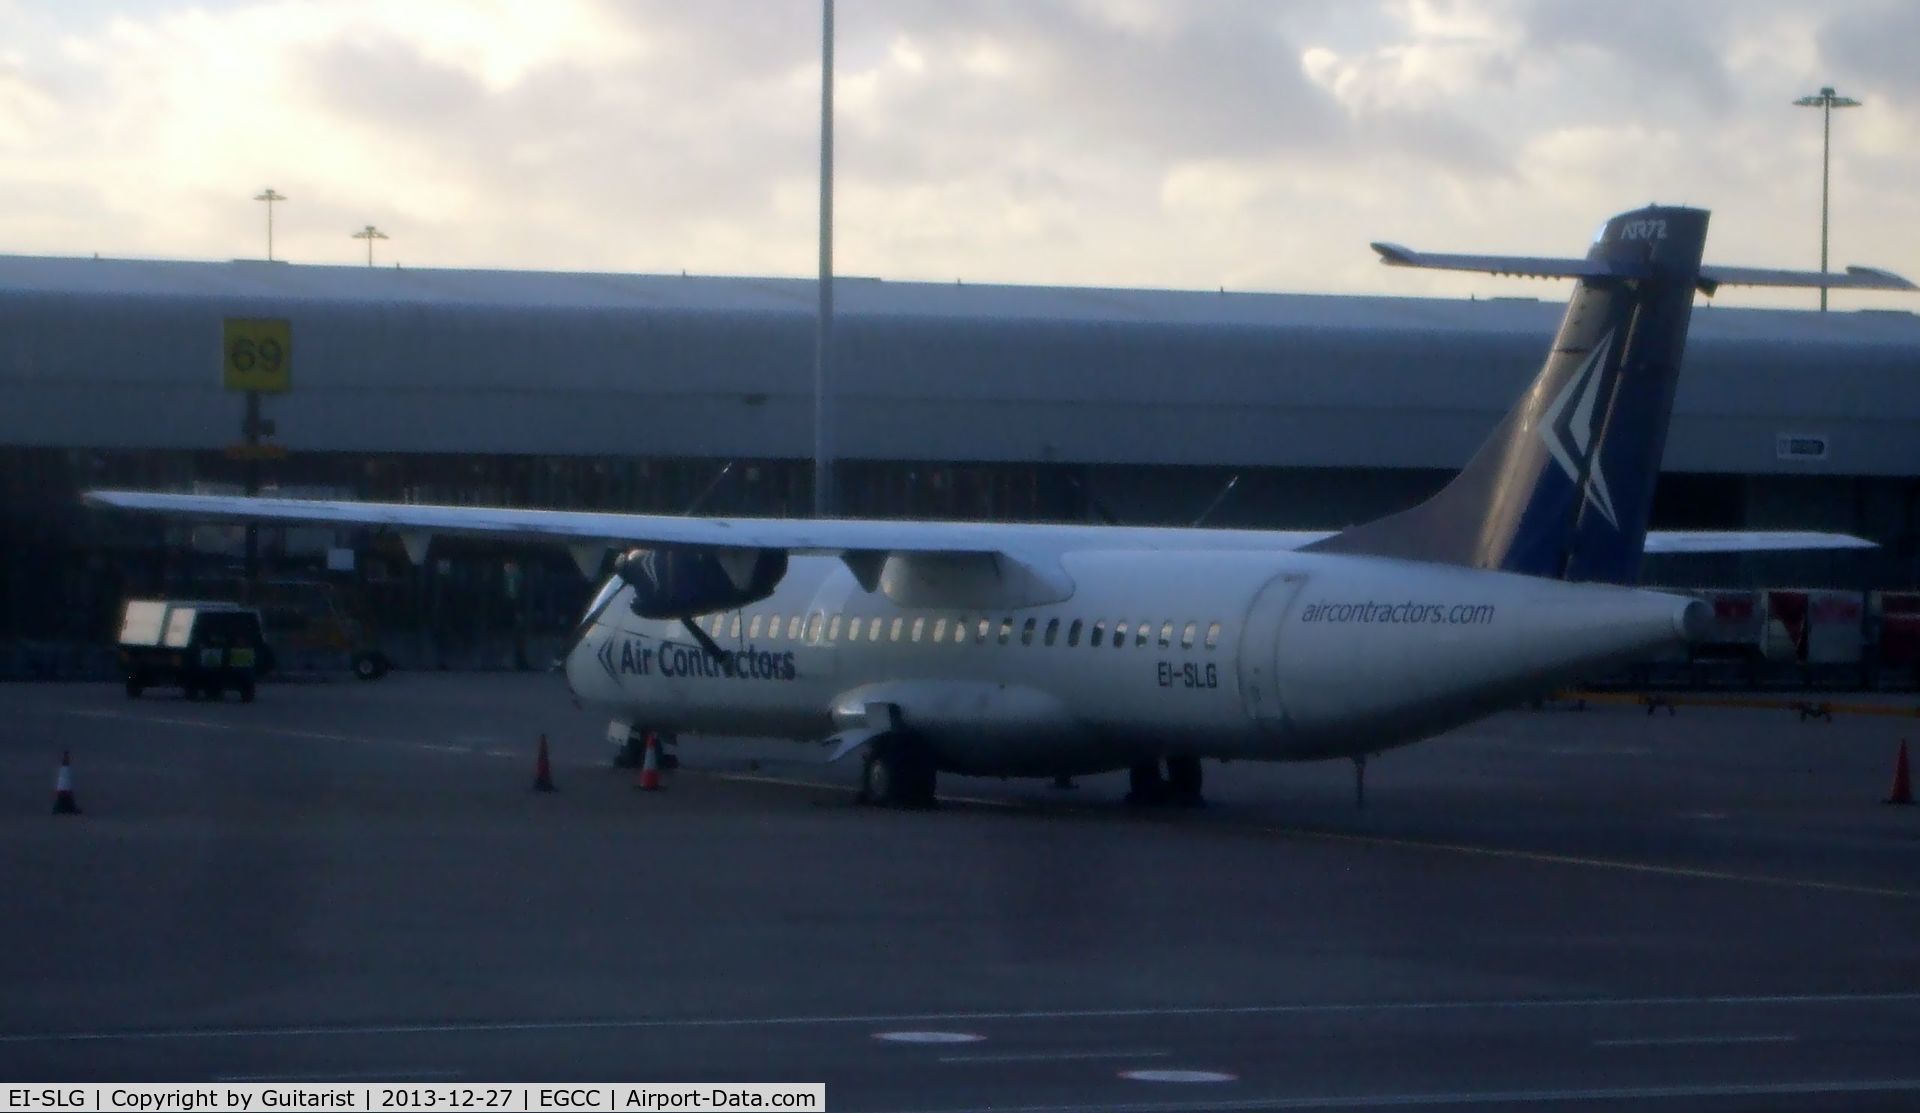 EI-SLG, 1990 ATR 72-202 C/N 183, Parked up at Manchester